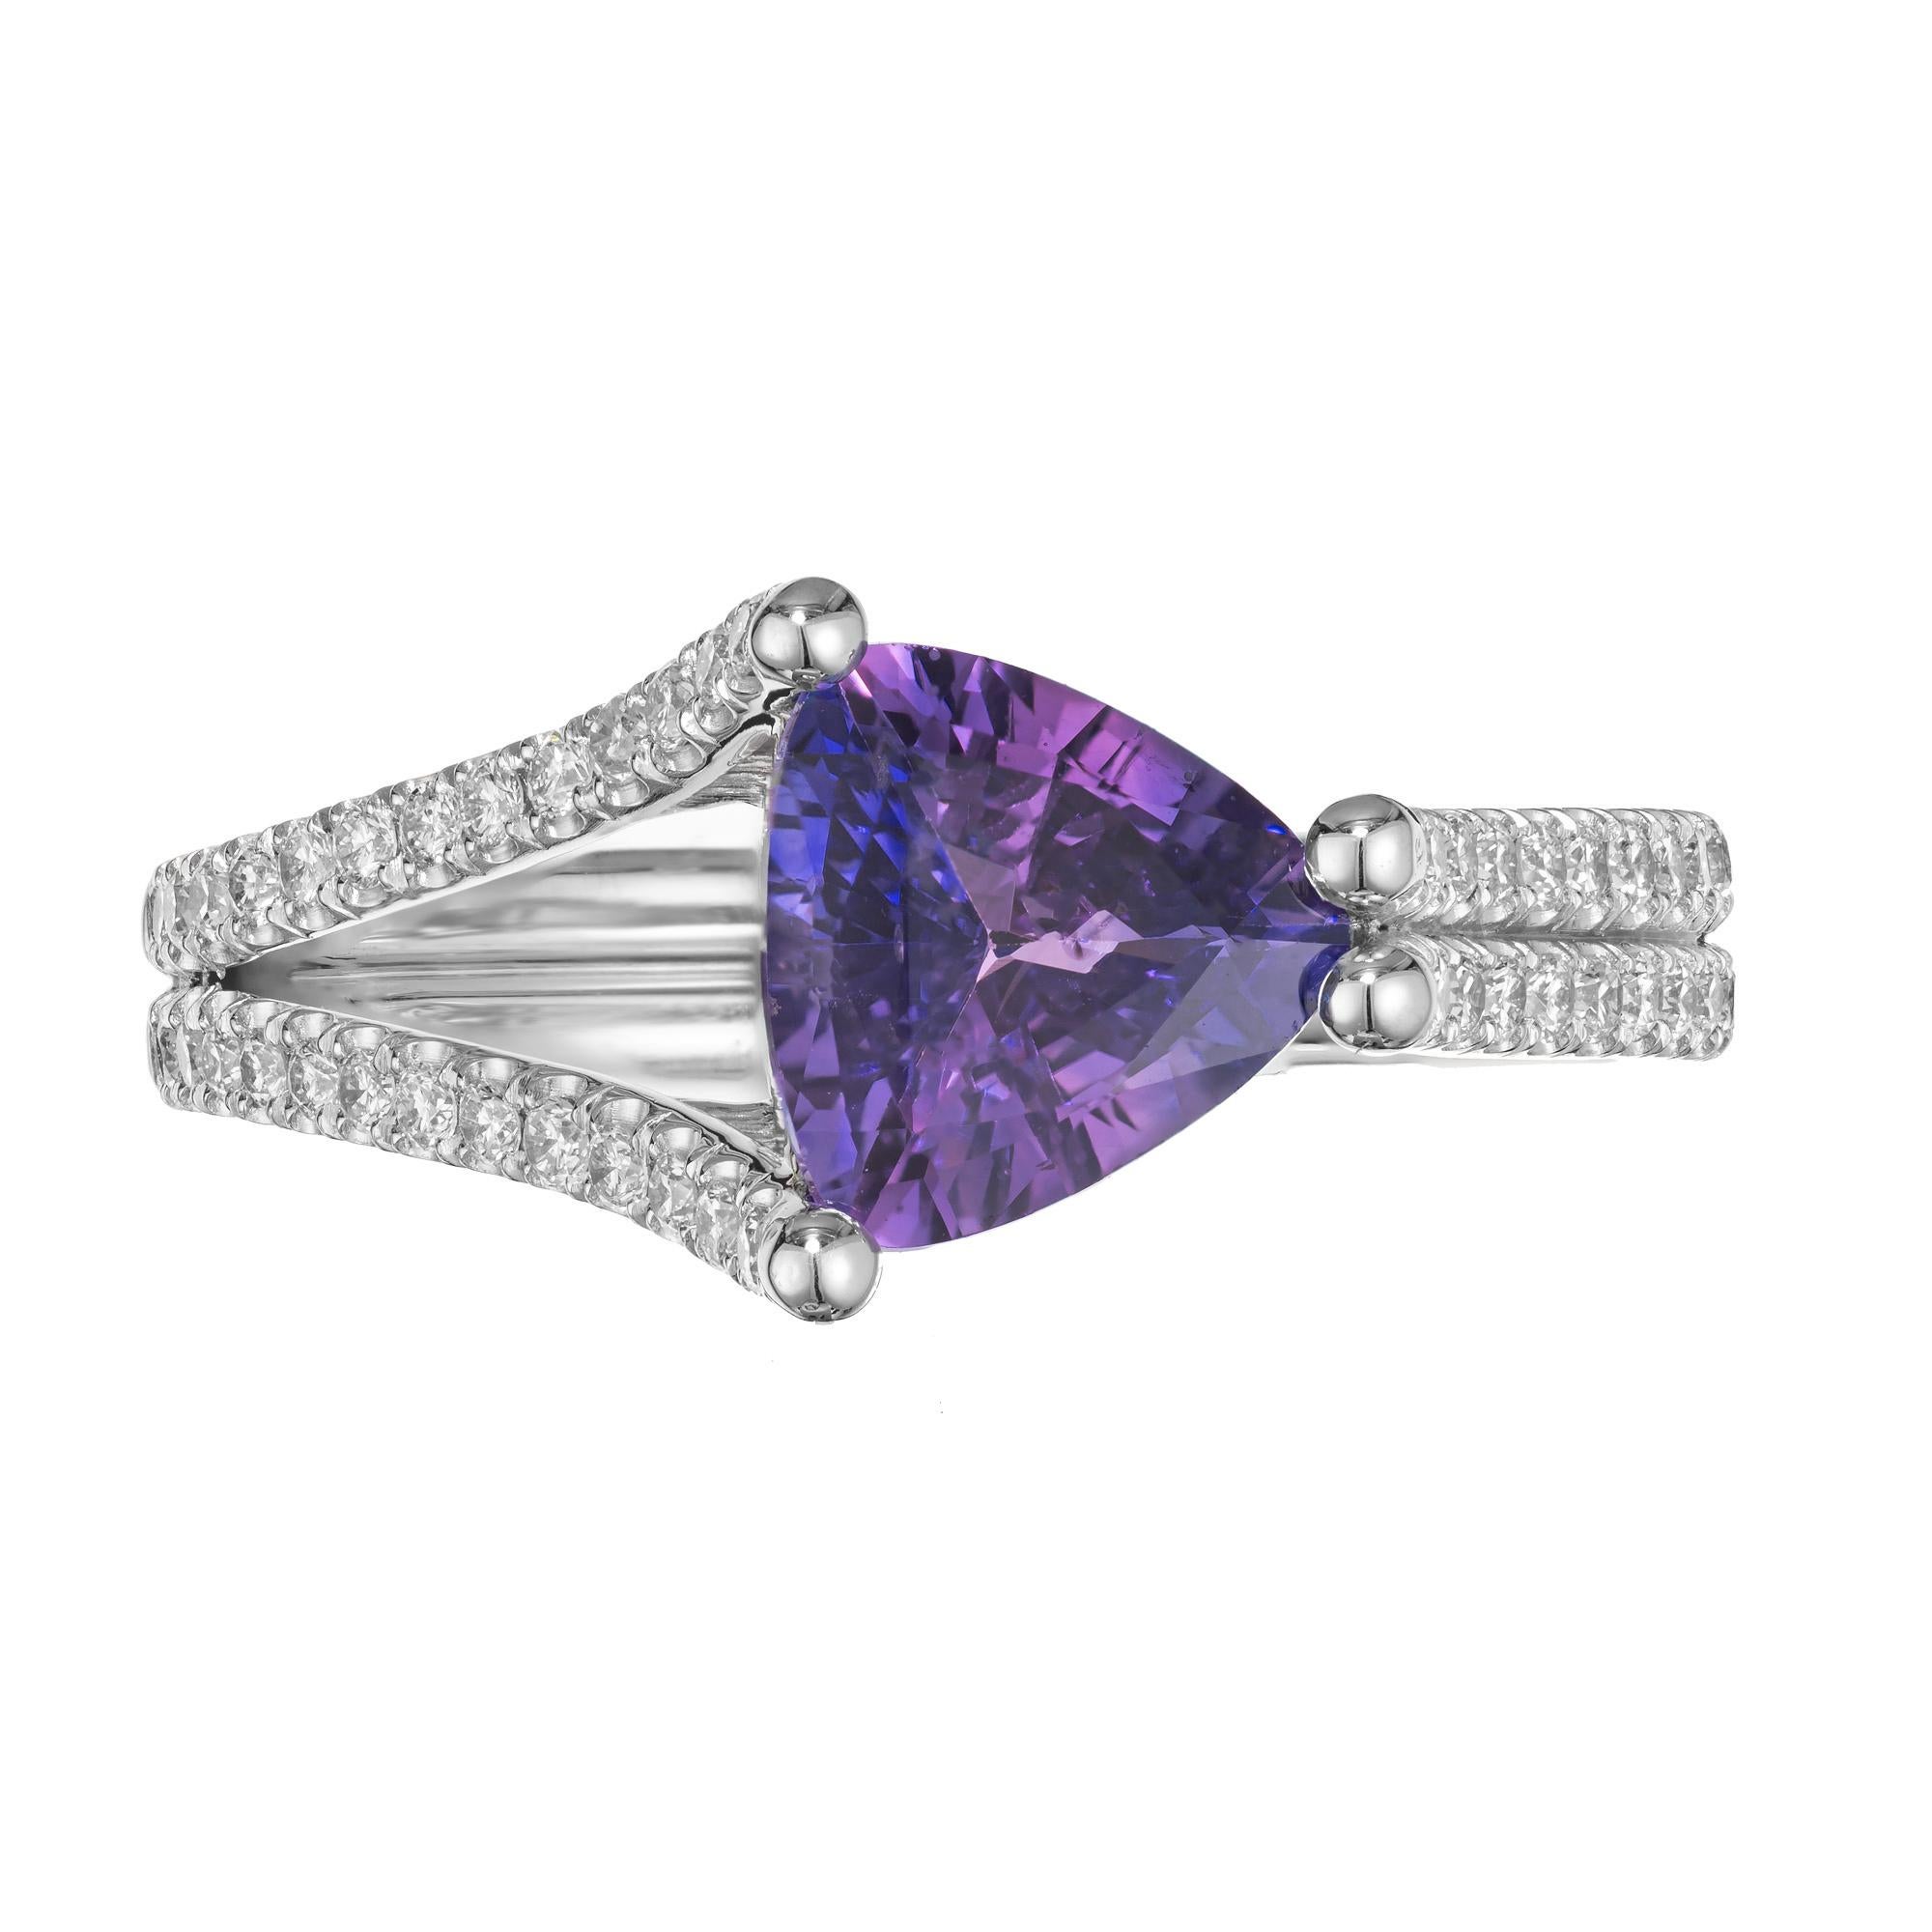 Violet sapphire and diamond engagement ring. Spectacular bright violet triangular cut sapphire mounted in an 18k white gold setting. One side of the setting is as split shank that becomes a double shank on the other side. with 54 round brilliant cut